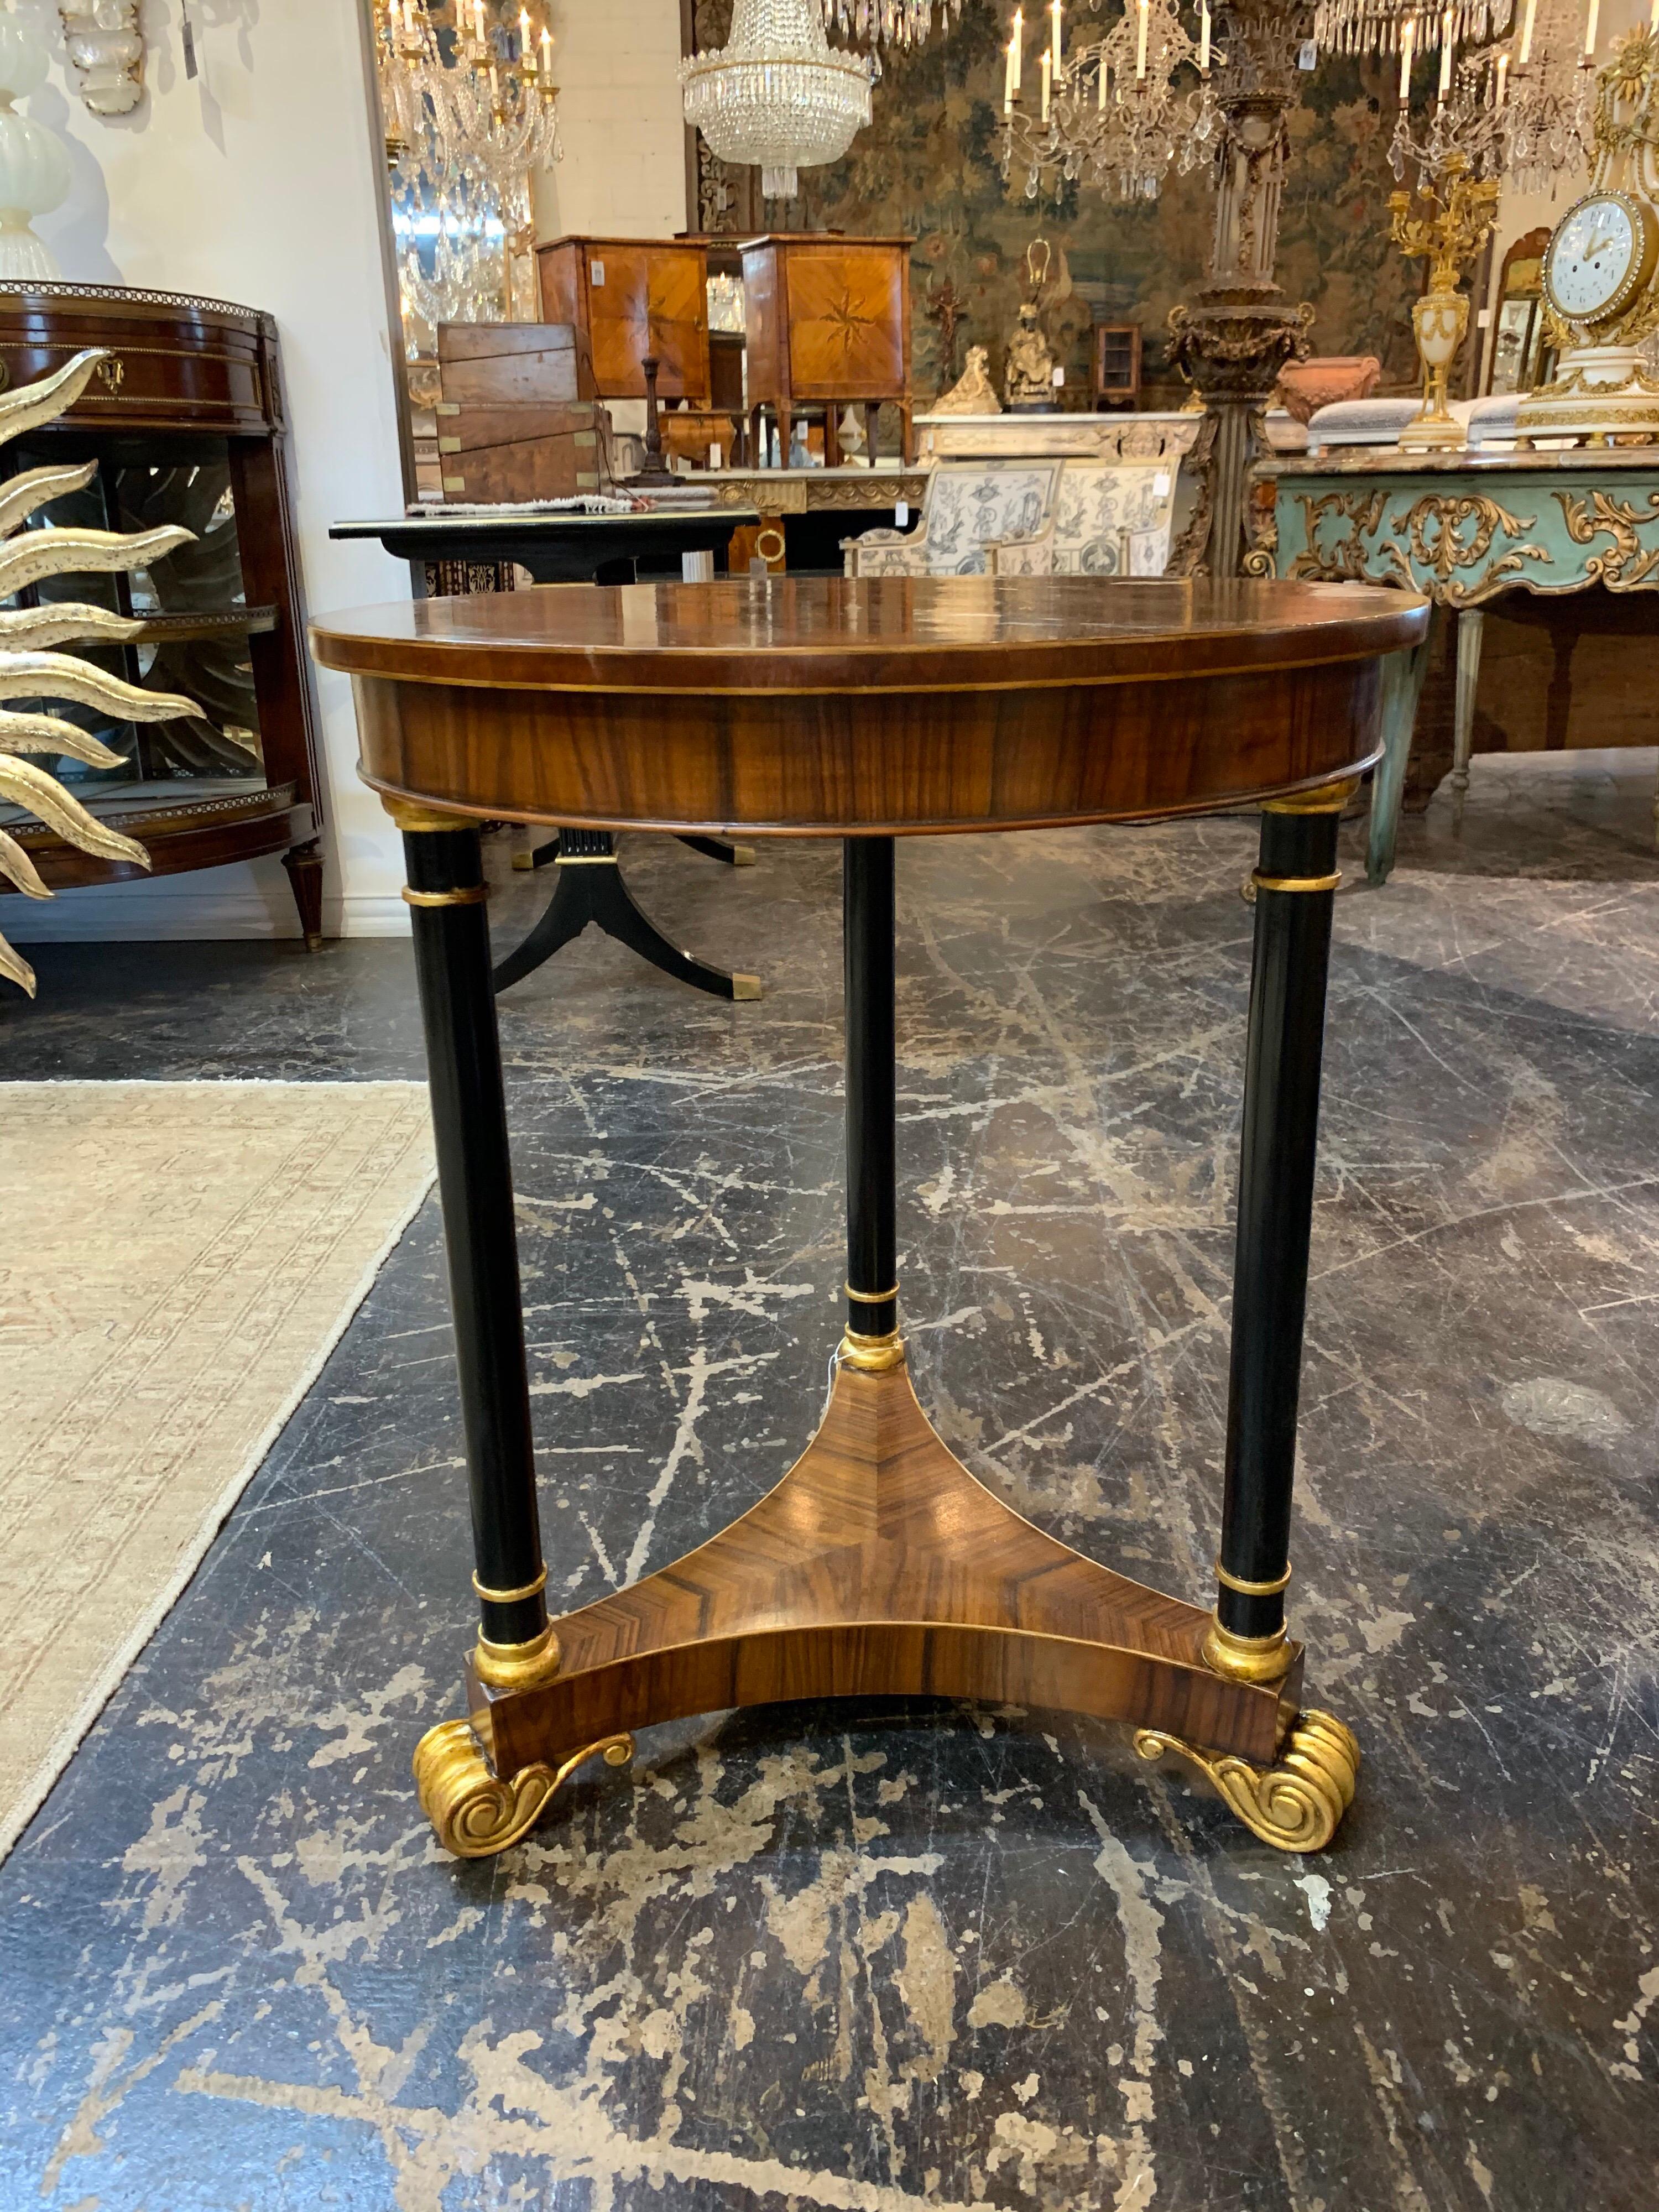 Very handsome Empire style rosewood side table with ebonized detail and gilt trim.
Beautiful finish on this piece. A classic design that is so elegant!